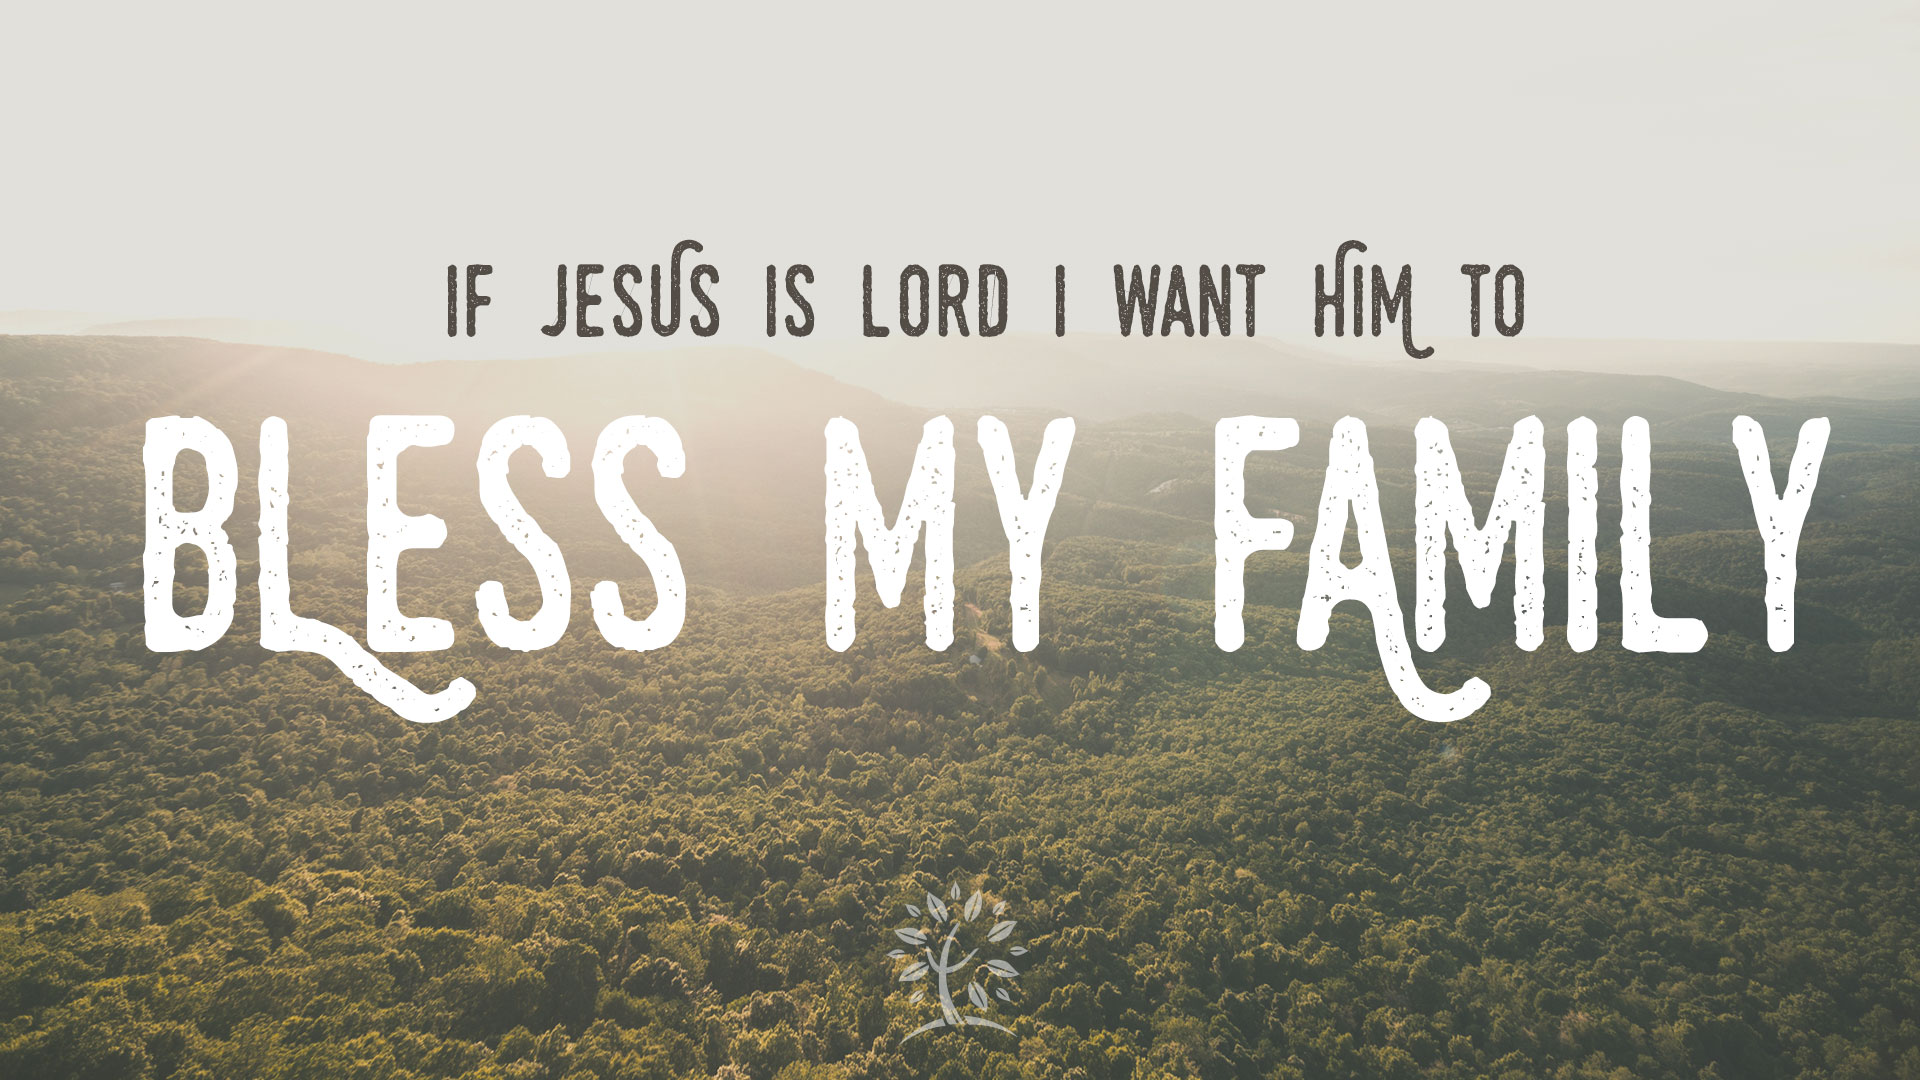 Series: <span>I Want Jesus To Bless My Family</span>